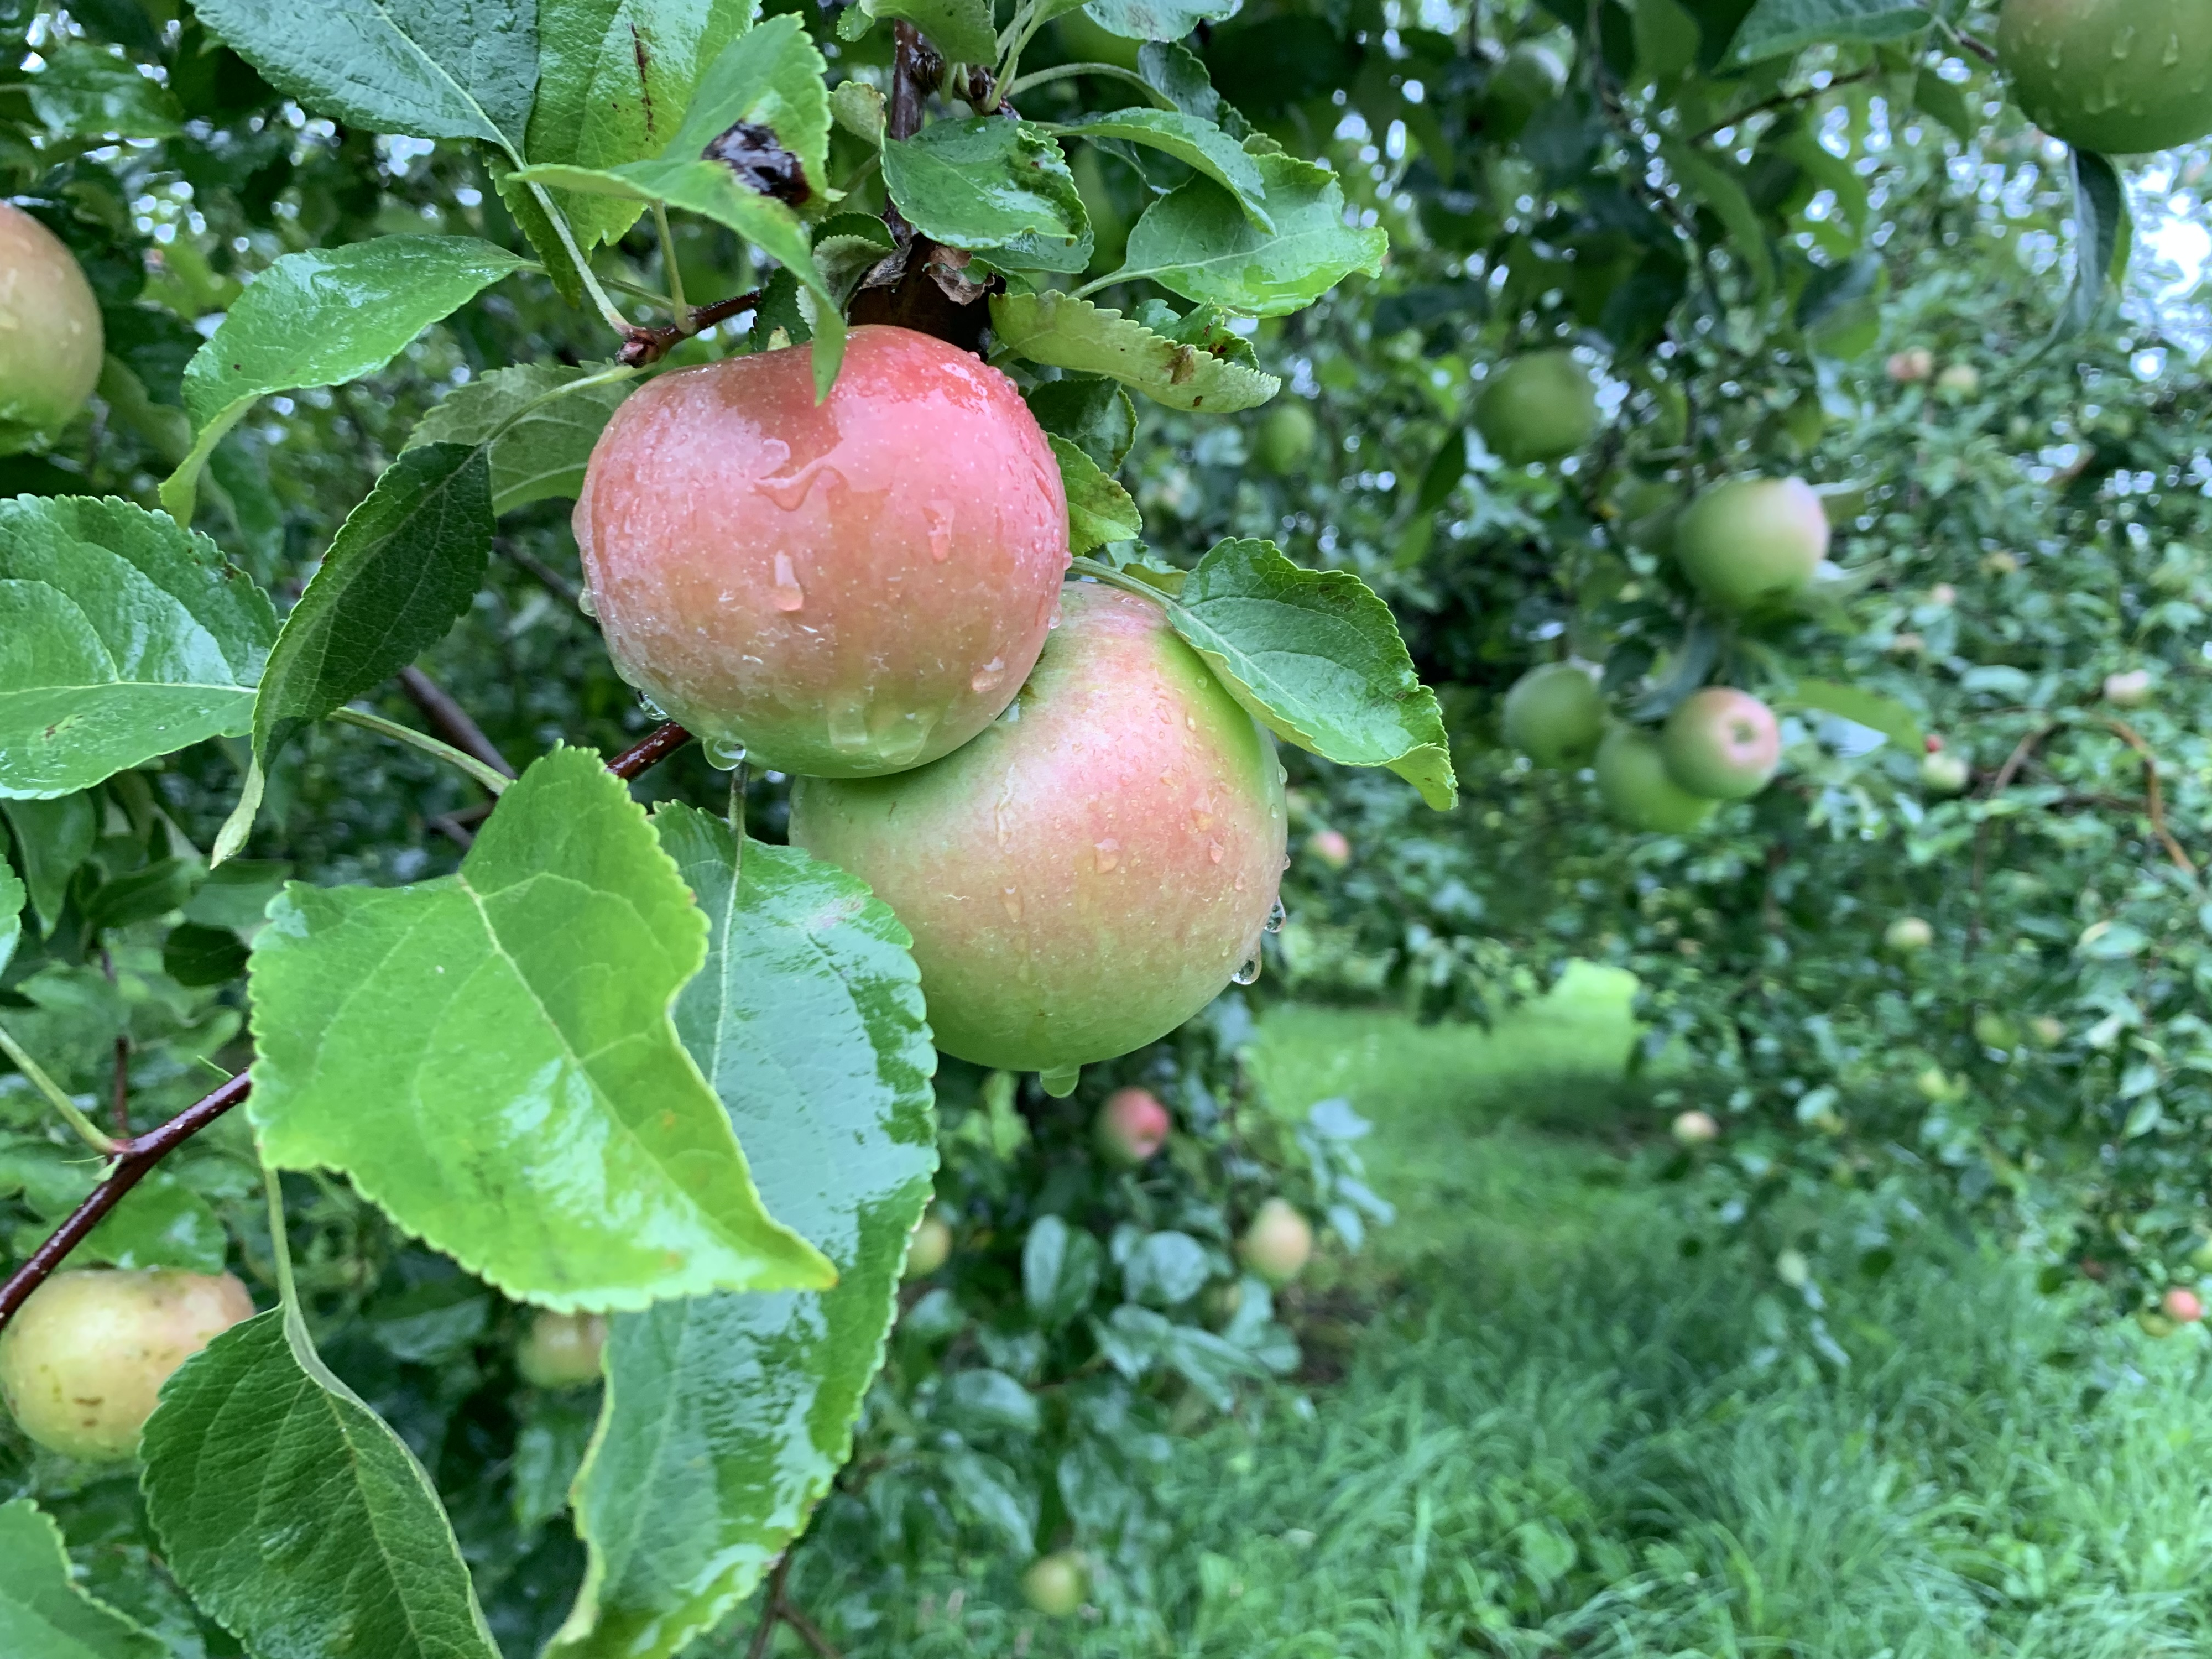 What to Expect at the Apple Orchard